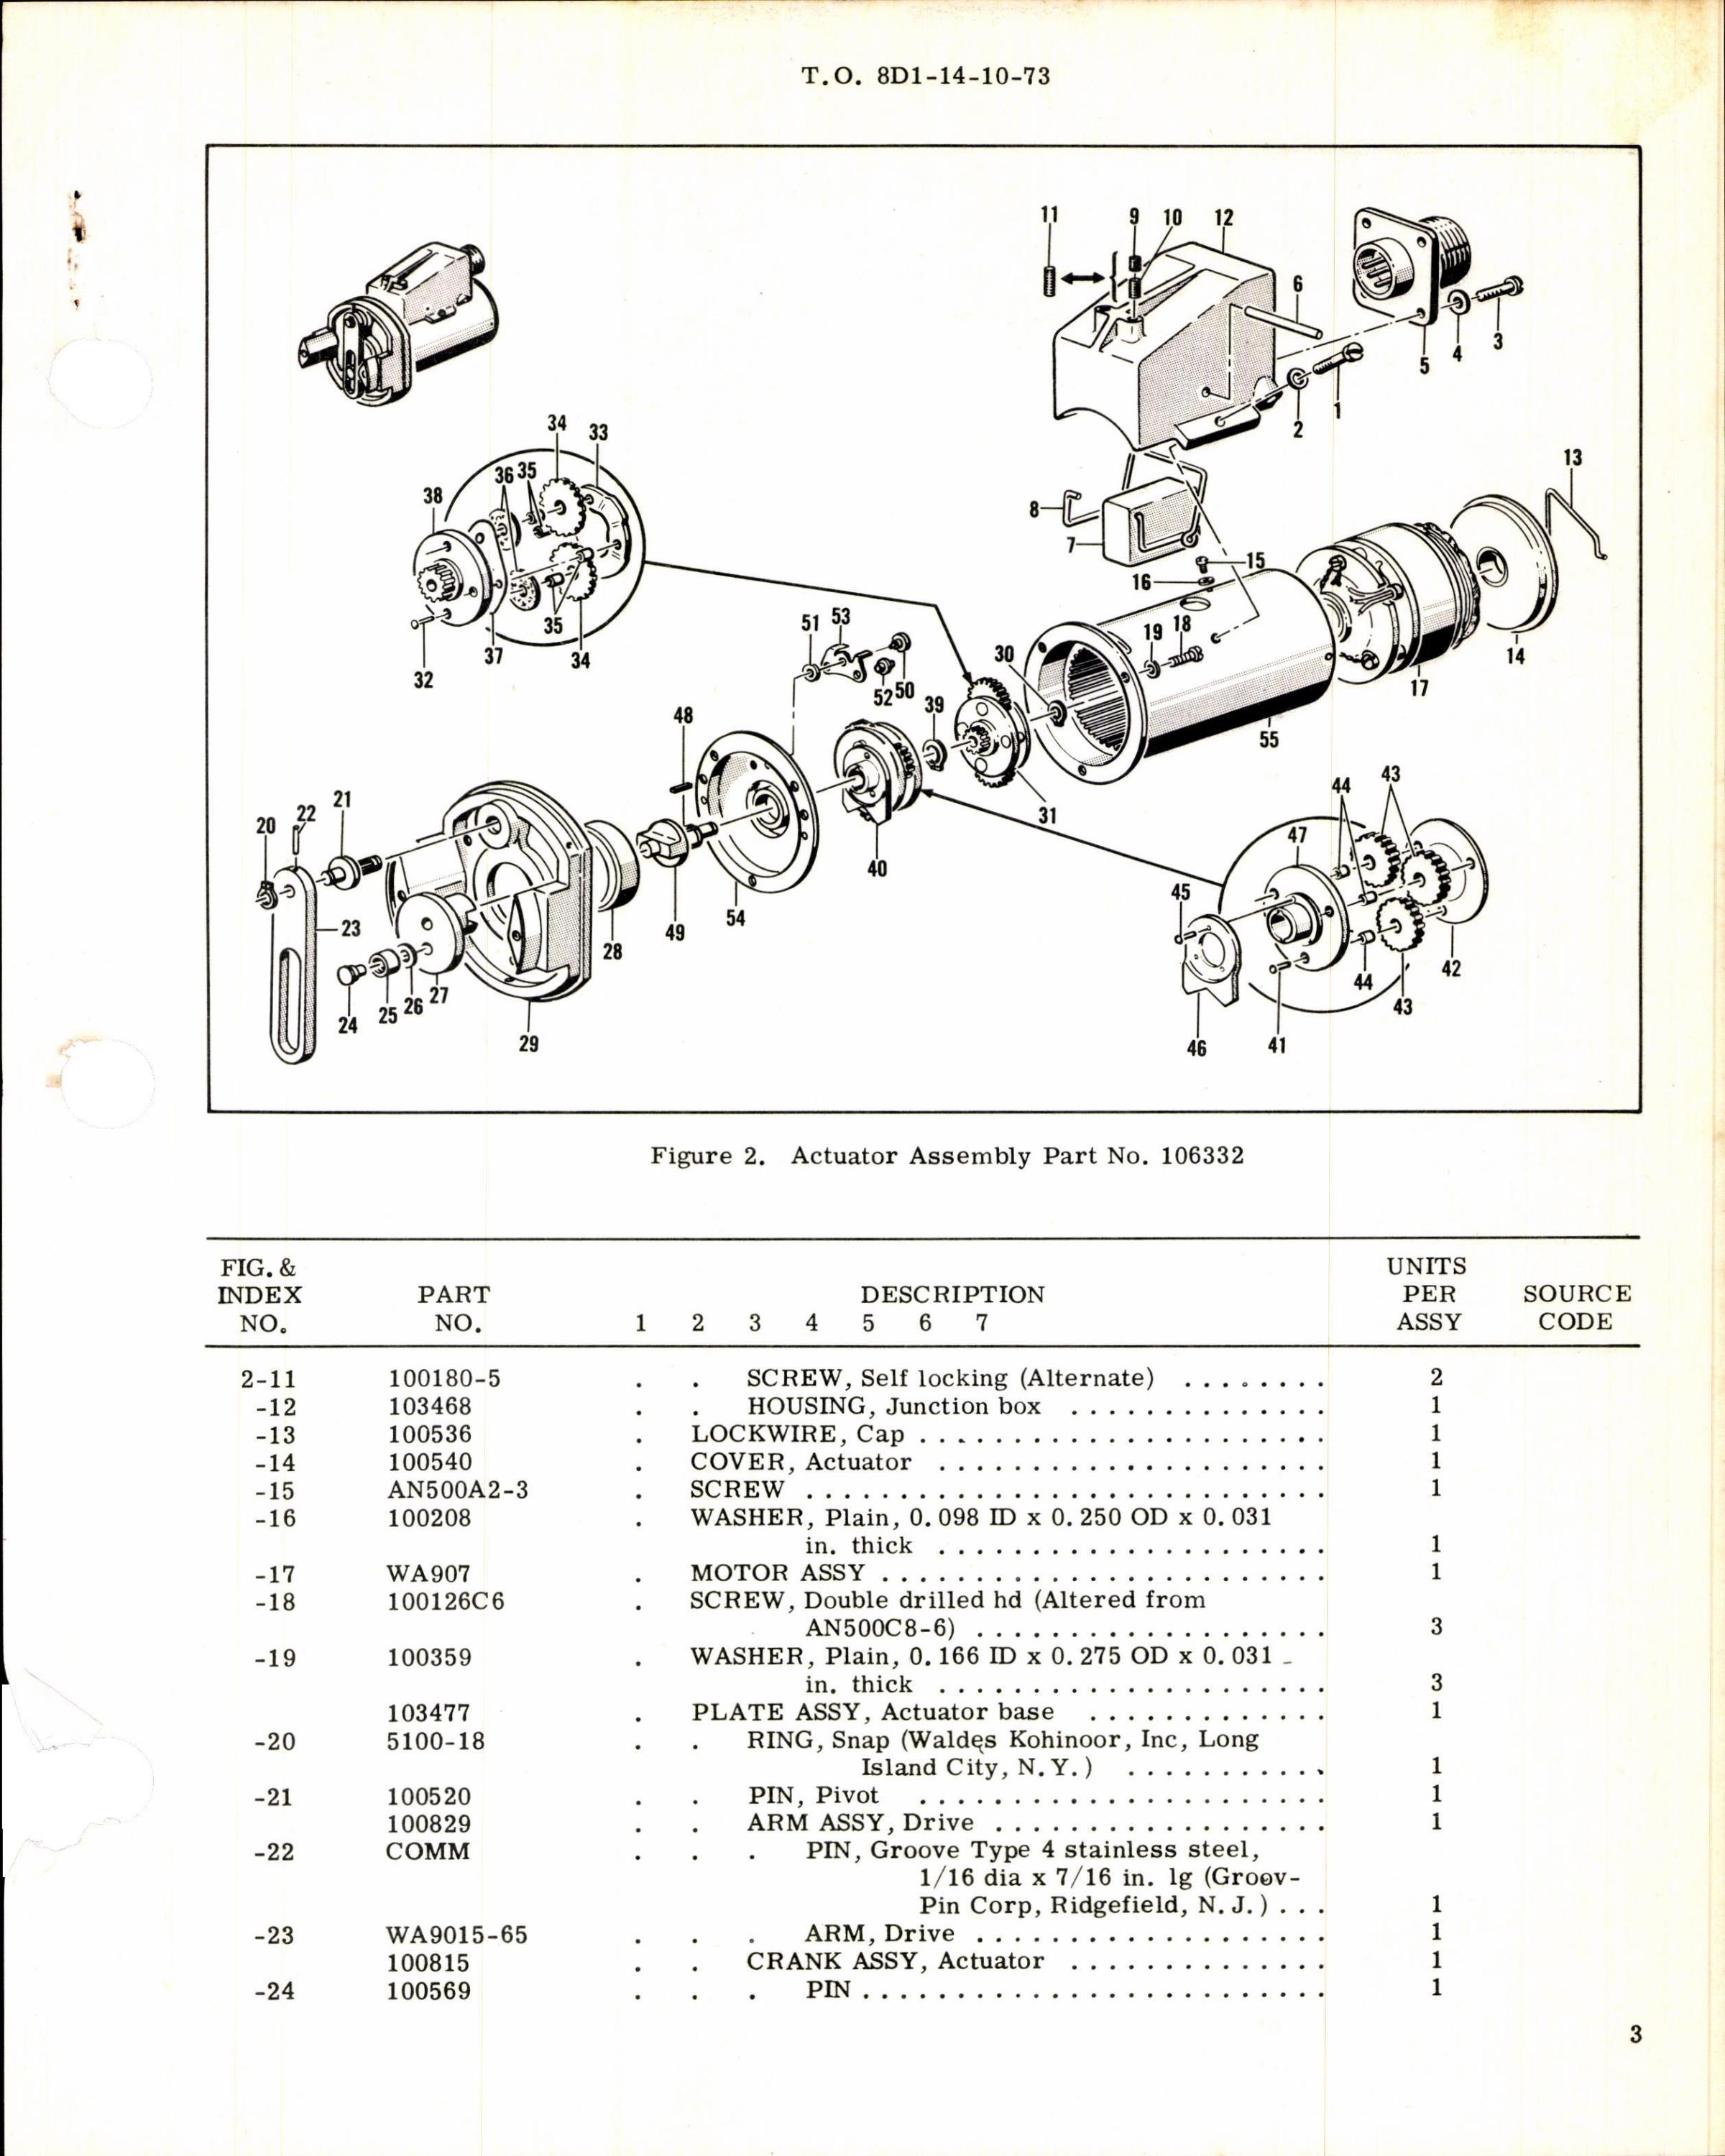 Sample page 3 from AirCorps Library document: Instructions w Parts Breakdown for Actuator Assembly Part 106332